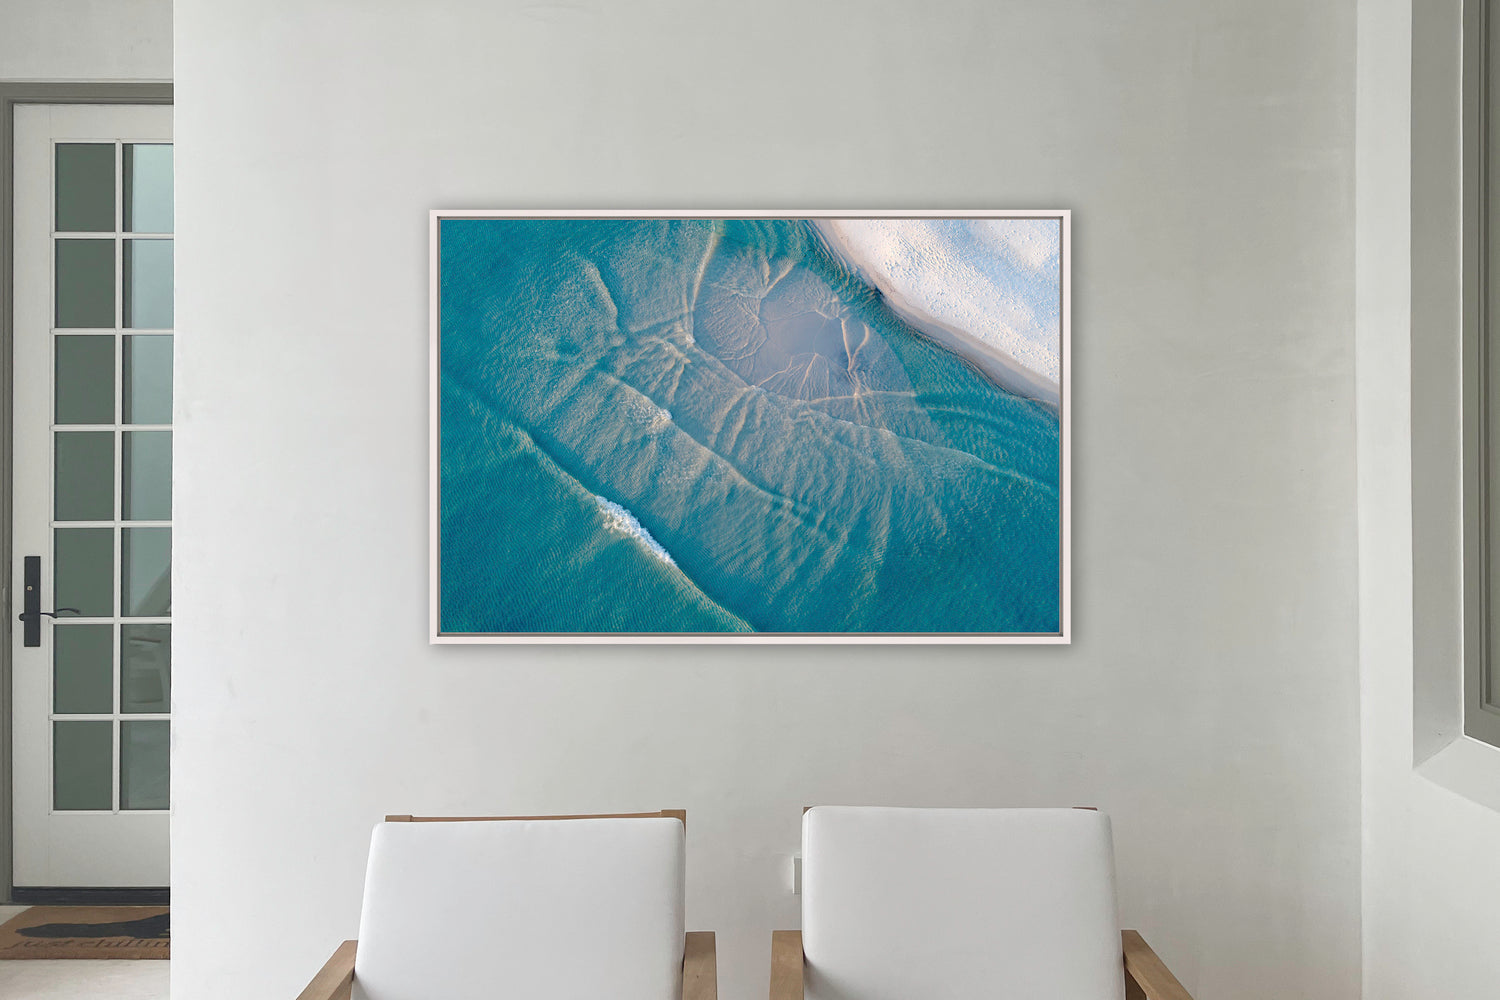 Where Waters Meet - Limited Edition + 48x32" Piece + 4 Course Dinner at Gallery